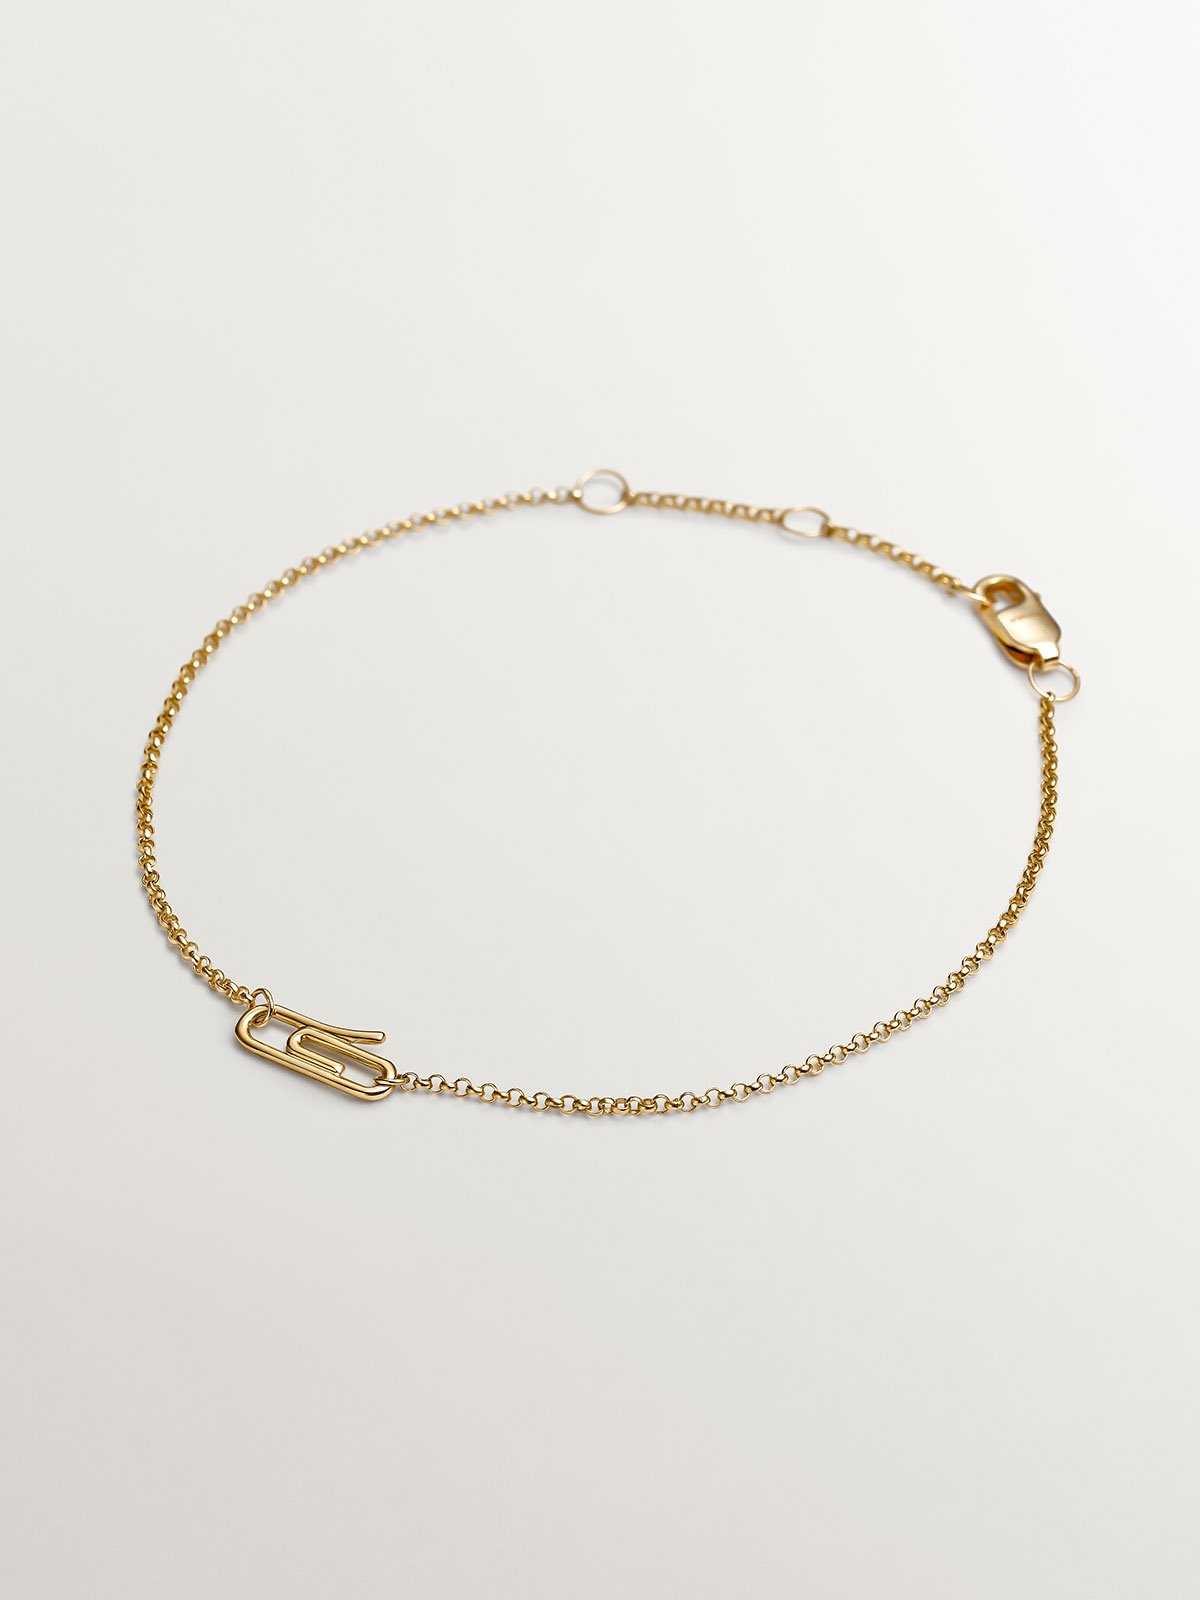 9K Yellow Gold Bracelet with Clip